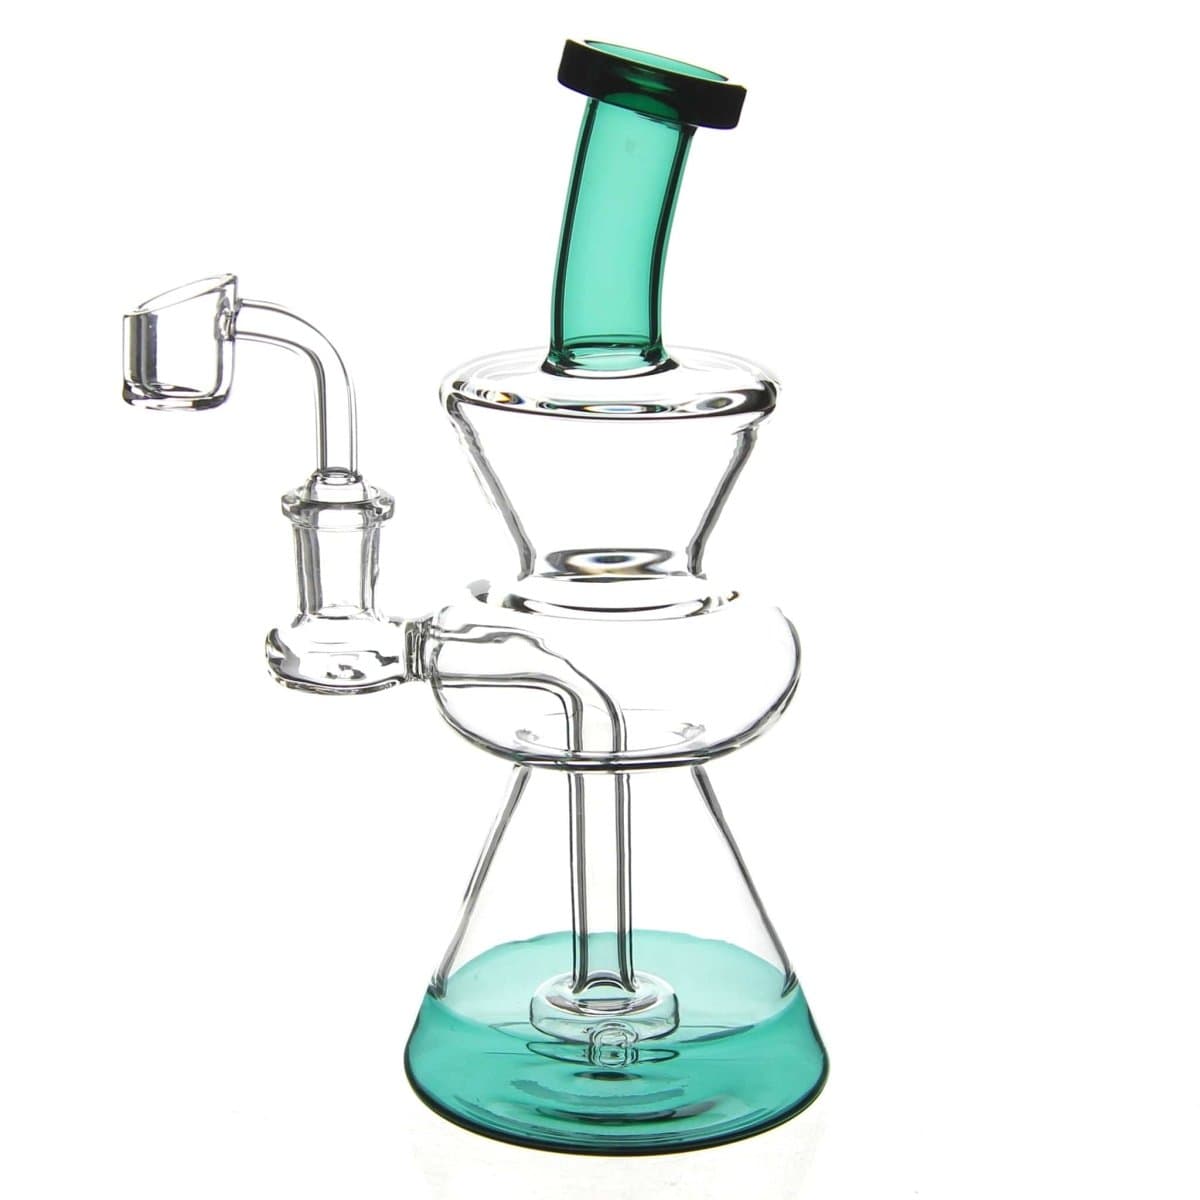 Benext Generation Glass Teal Flavor Chaser Dab Rig